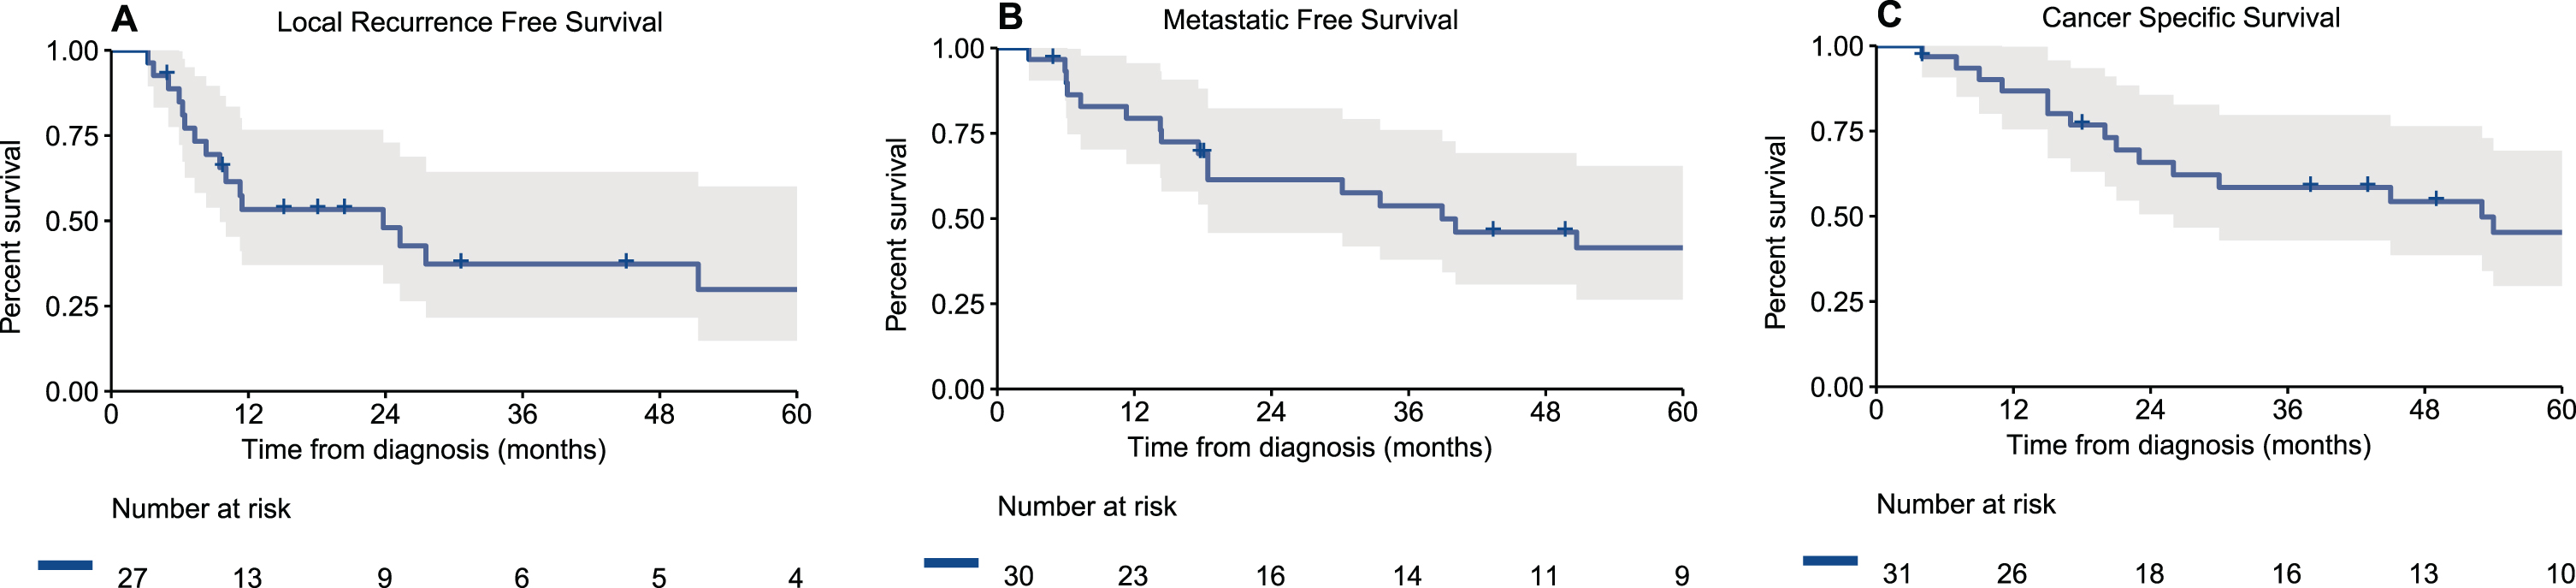 Kaplan-Meier curves of (A) local recurrence free survival of patients who underwent treatment for their loco-regional disease (n = 27), (B) metastatic free survival of patients who presented without metastatic disease (n = 30), and (C) cancer specific survival of all patients with urethral melanoma (n = 31).